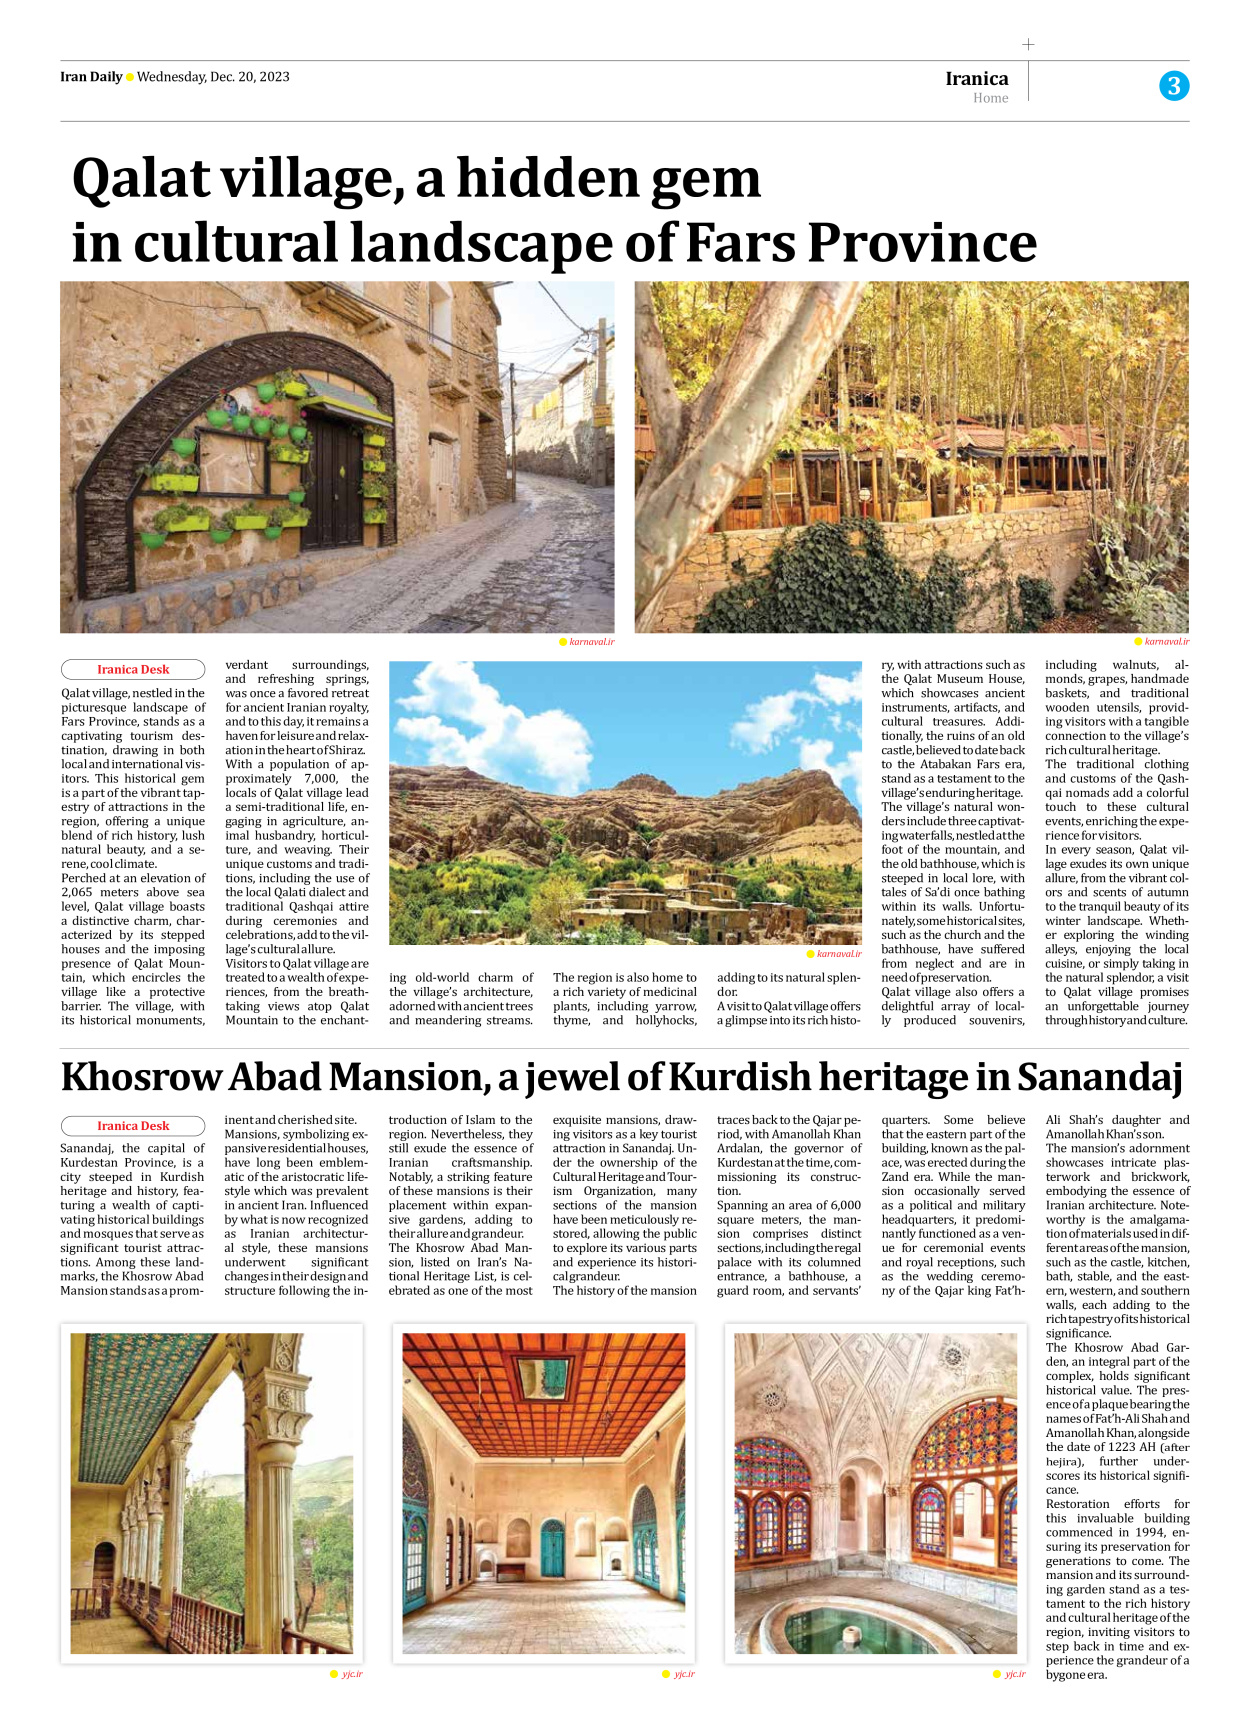 Iran Daily - Number Seven Thousand Four Hundred and Sixty Three - 20 December 2023 - Page 3